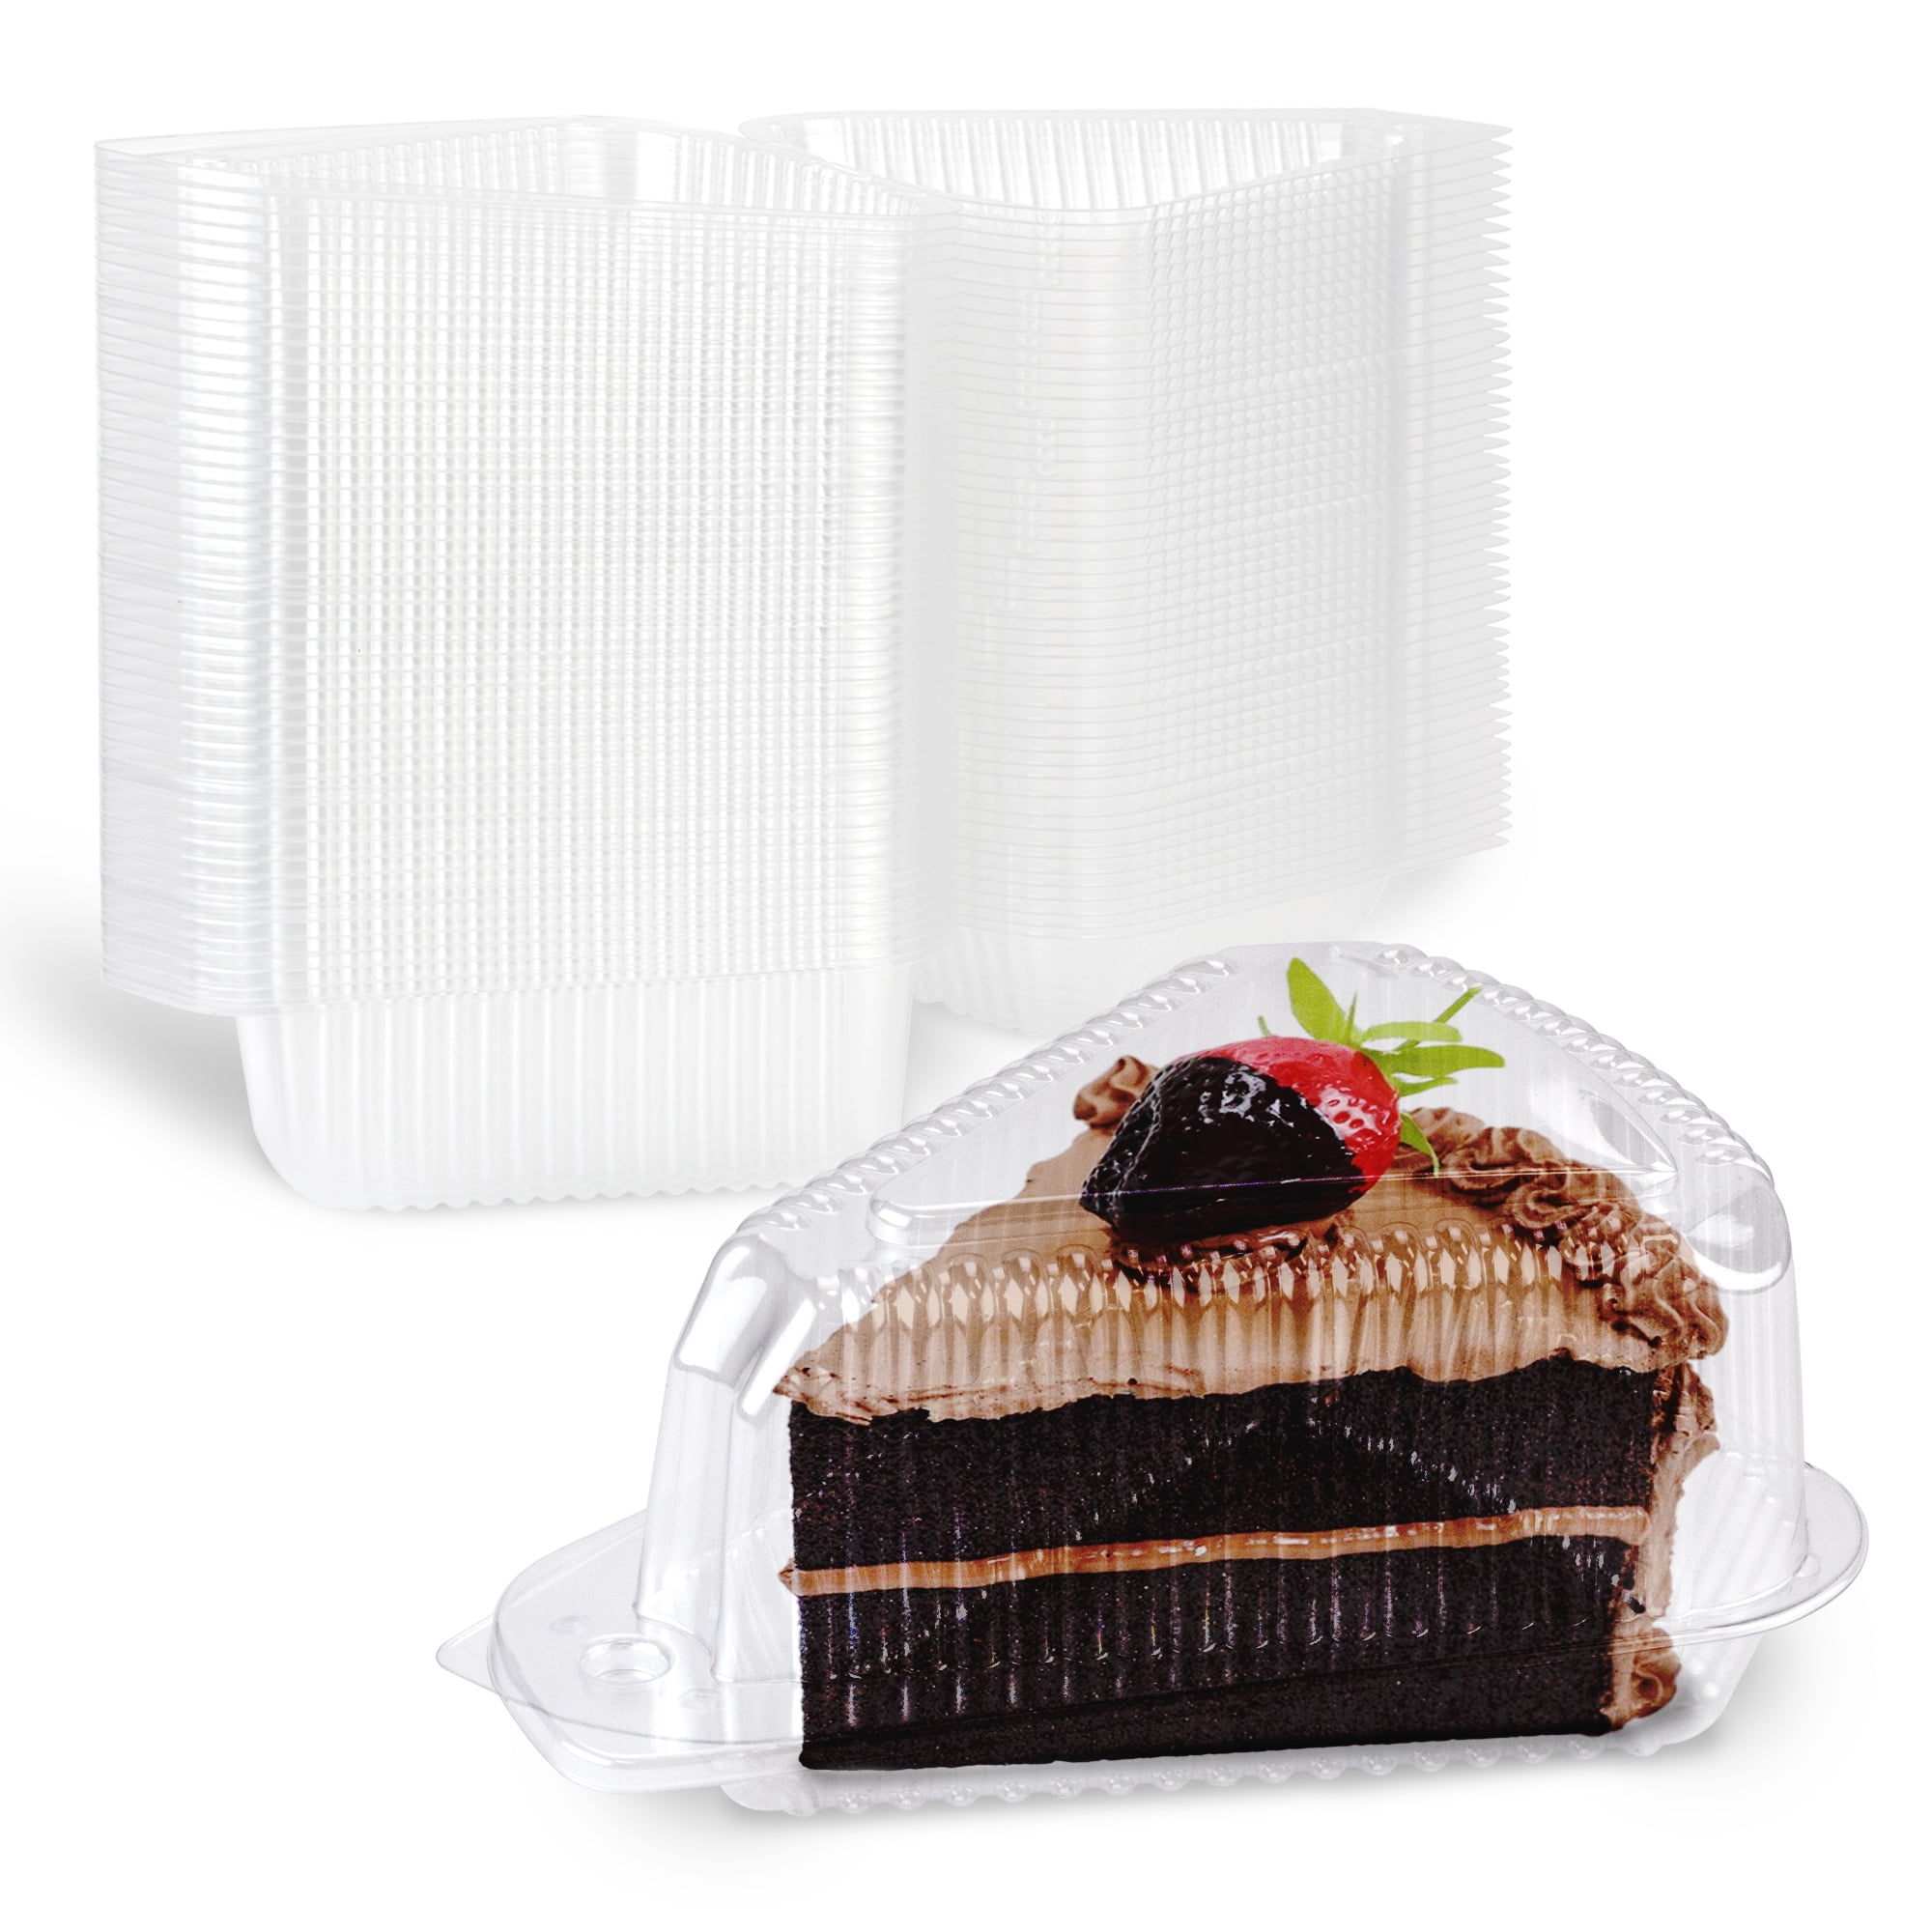 Cheesecake Boxes Suitable for Home Baking Salad Cheese Sandwiches Cake Shop Party Clear Containers for Cake Slice 50 Pieces Cake Slice Boxes Individual Pies